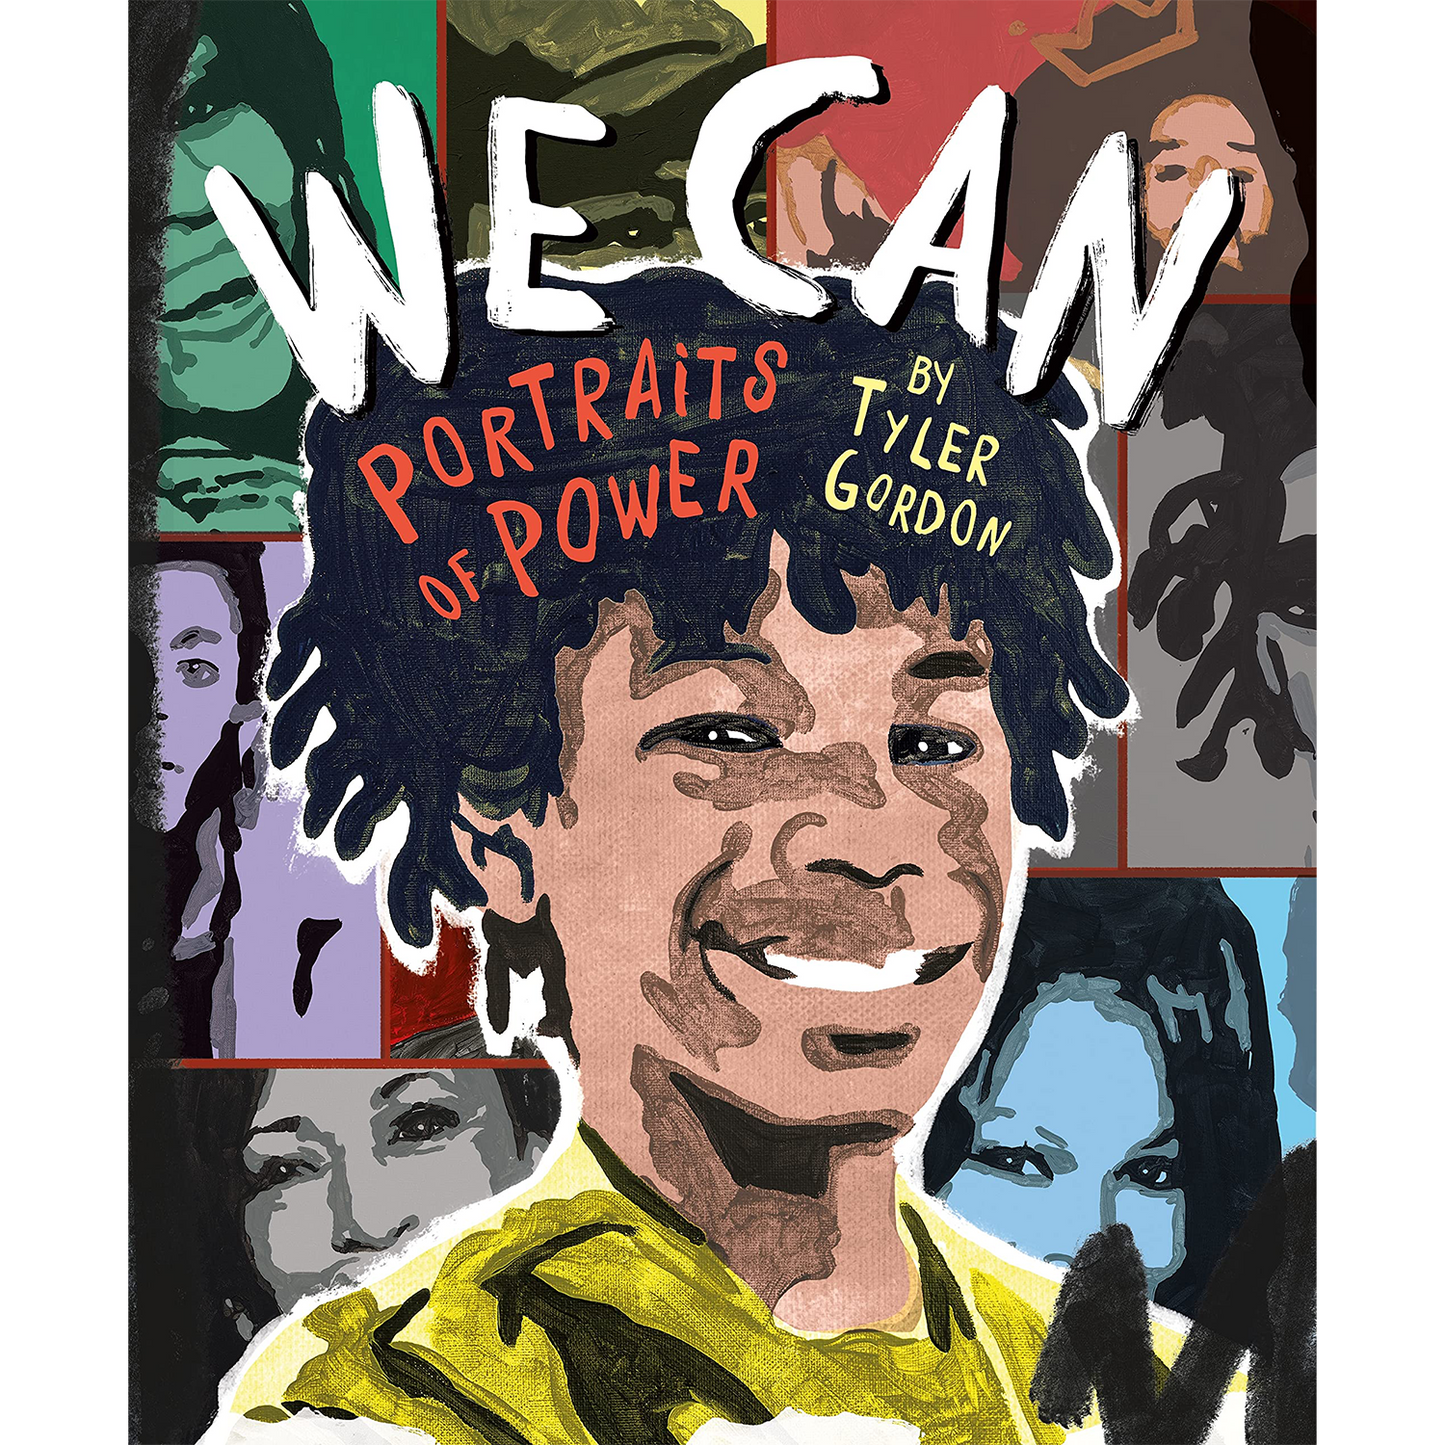 We Can: Portraits of Power